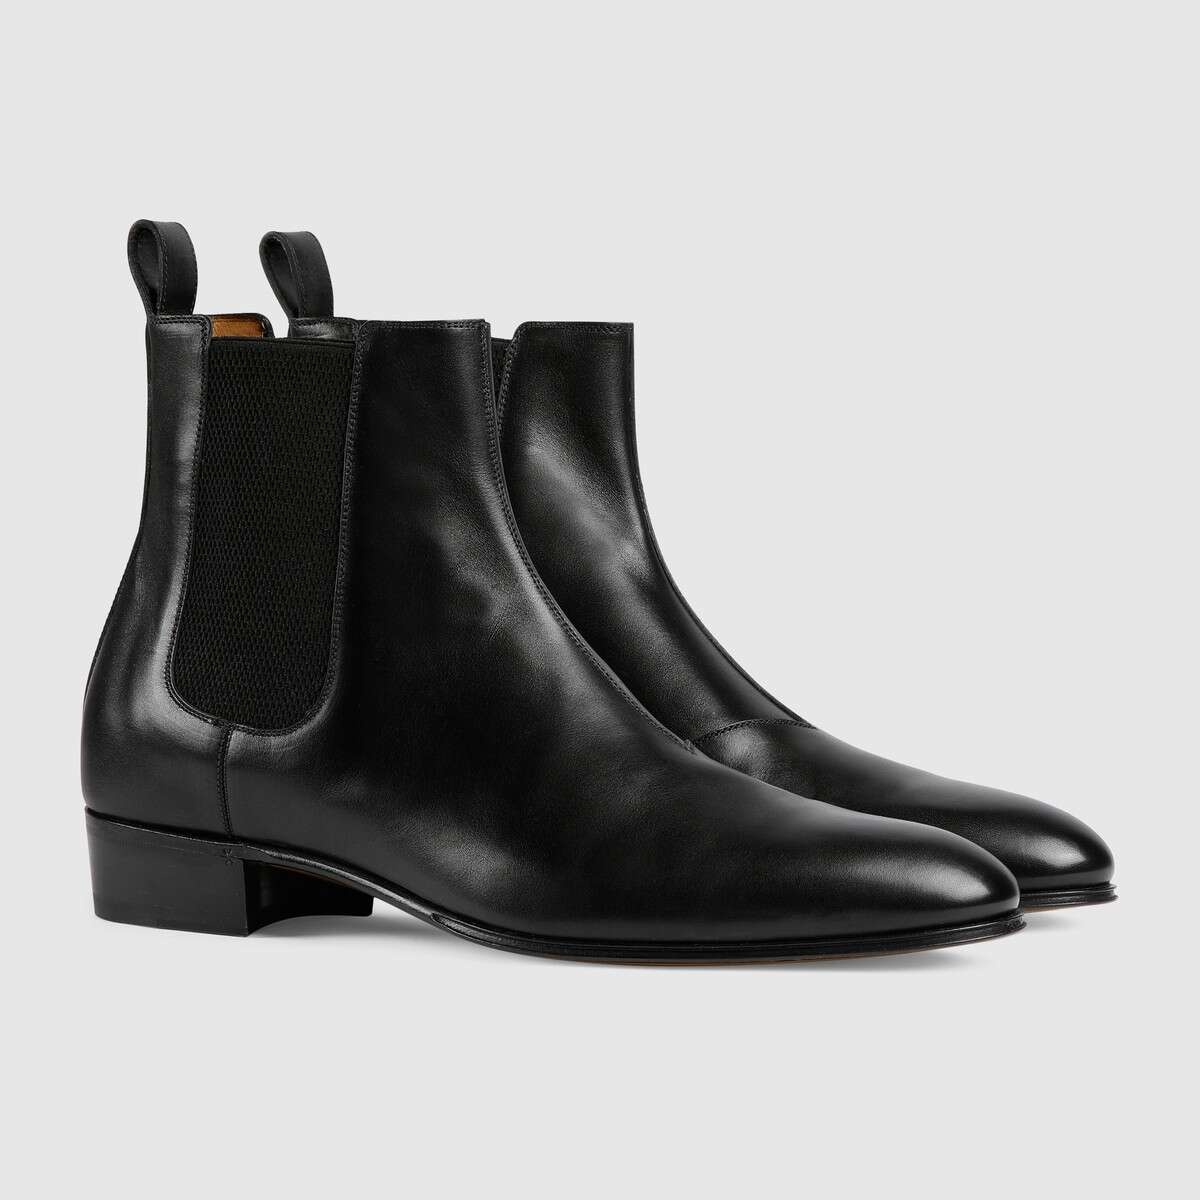 Men's ankle boot - 2